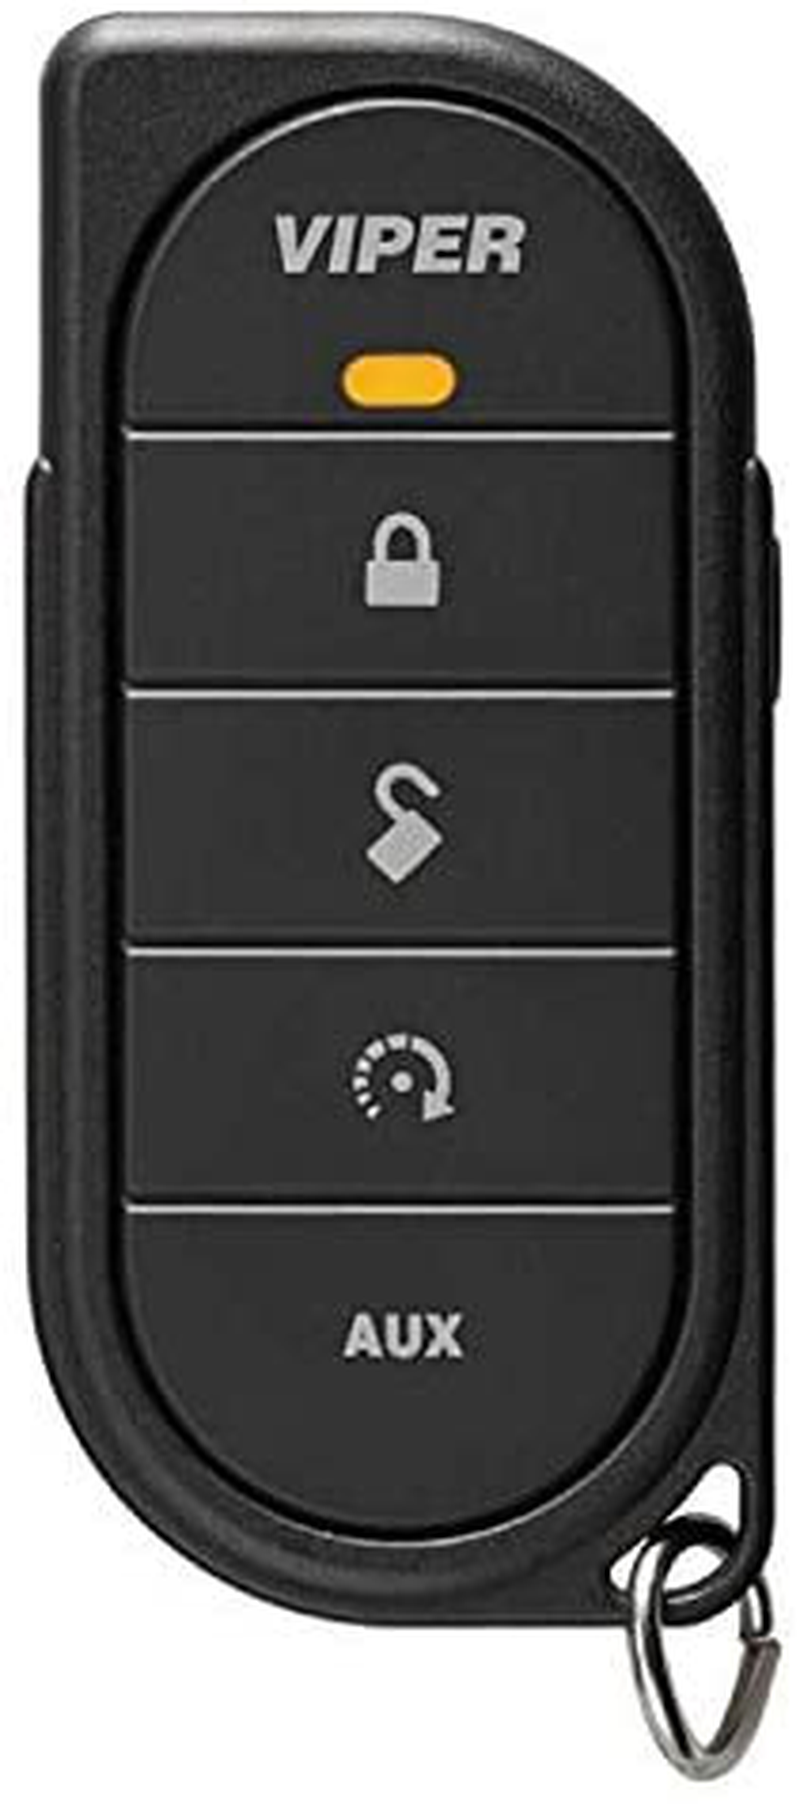 Viper 5706V 2-Way Car Security with Remote Start System